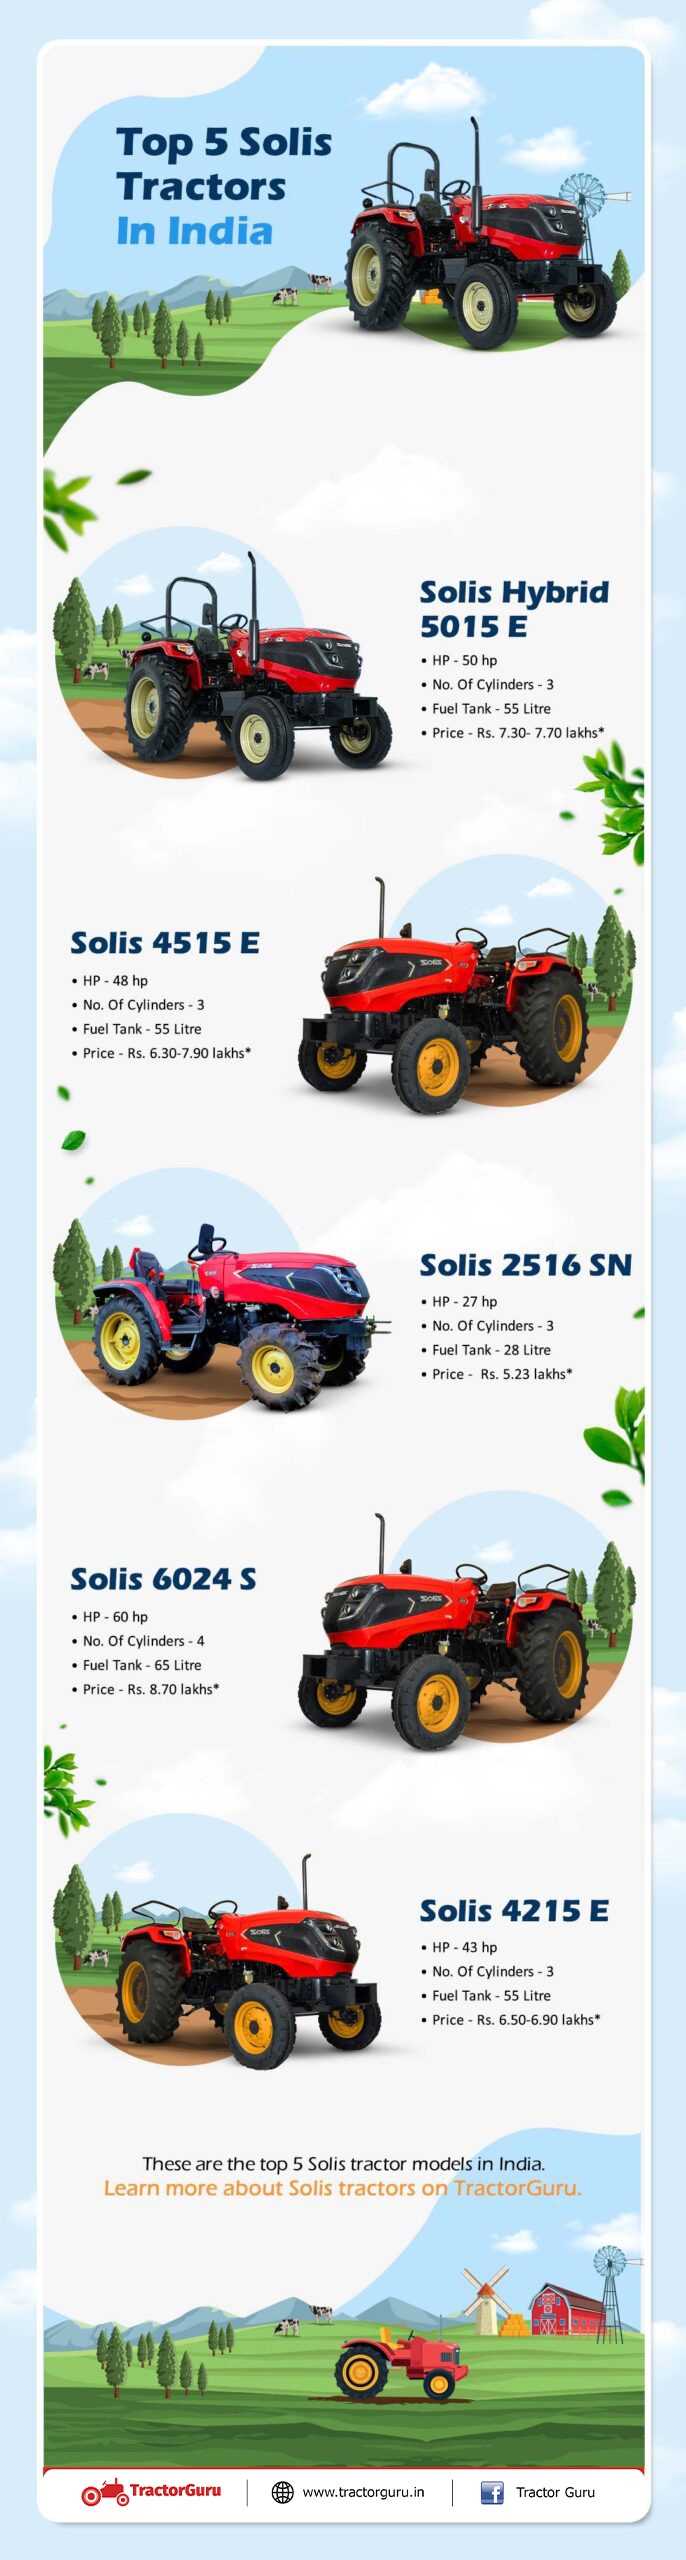 Top 5 solis tractor in india infographic